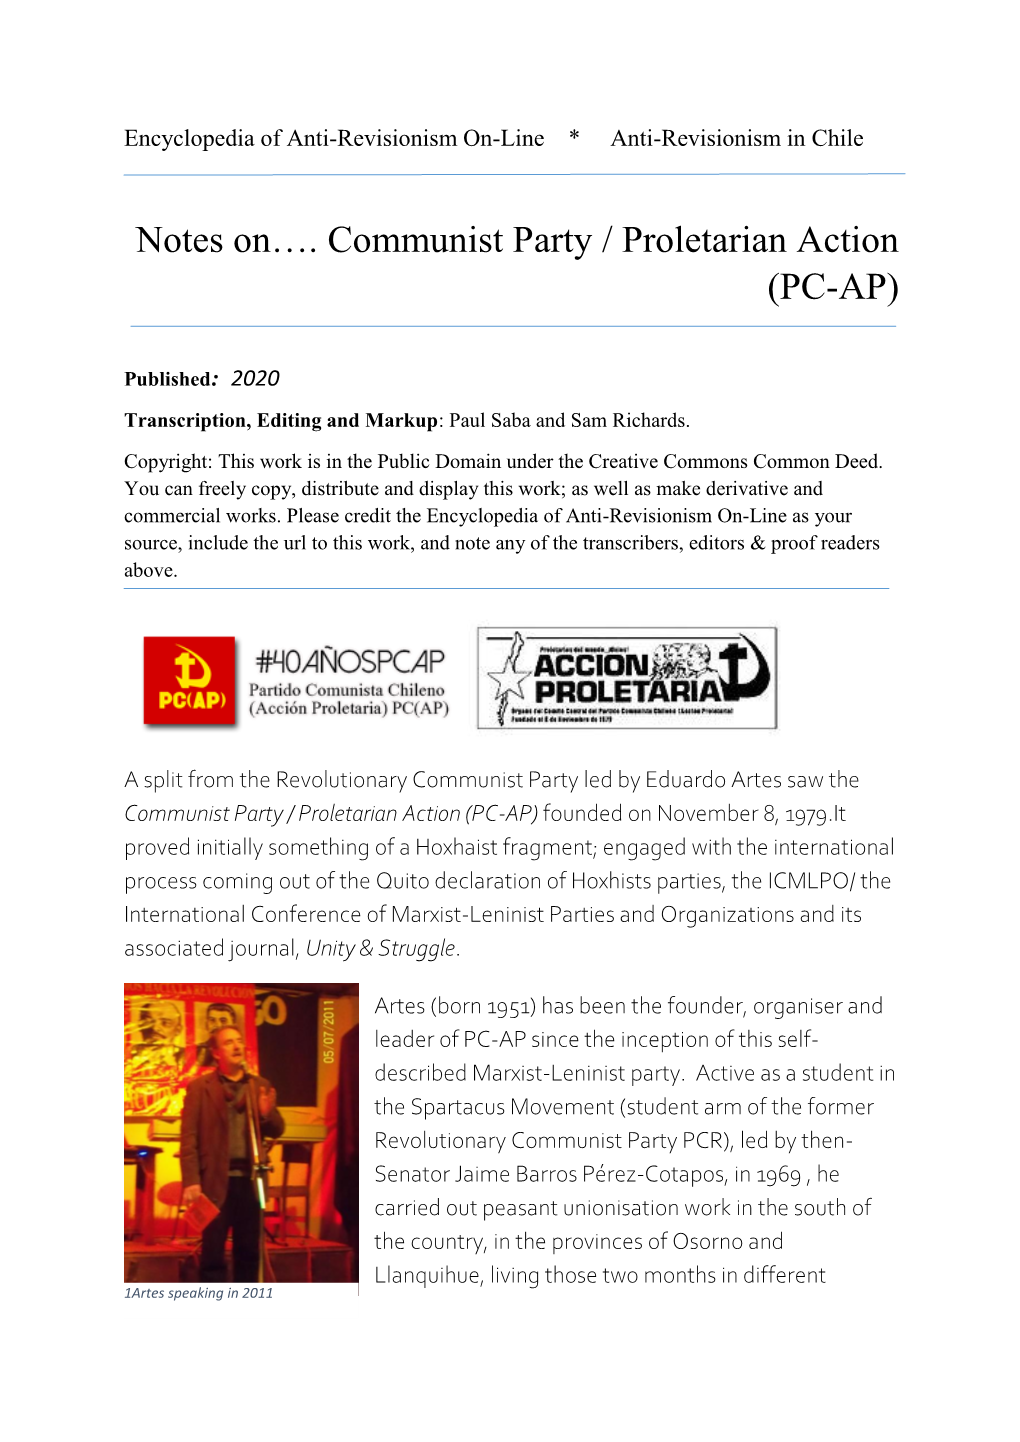 Notes On…. Communist Party / Proletarian Action (PC-AP)